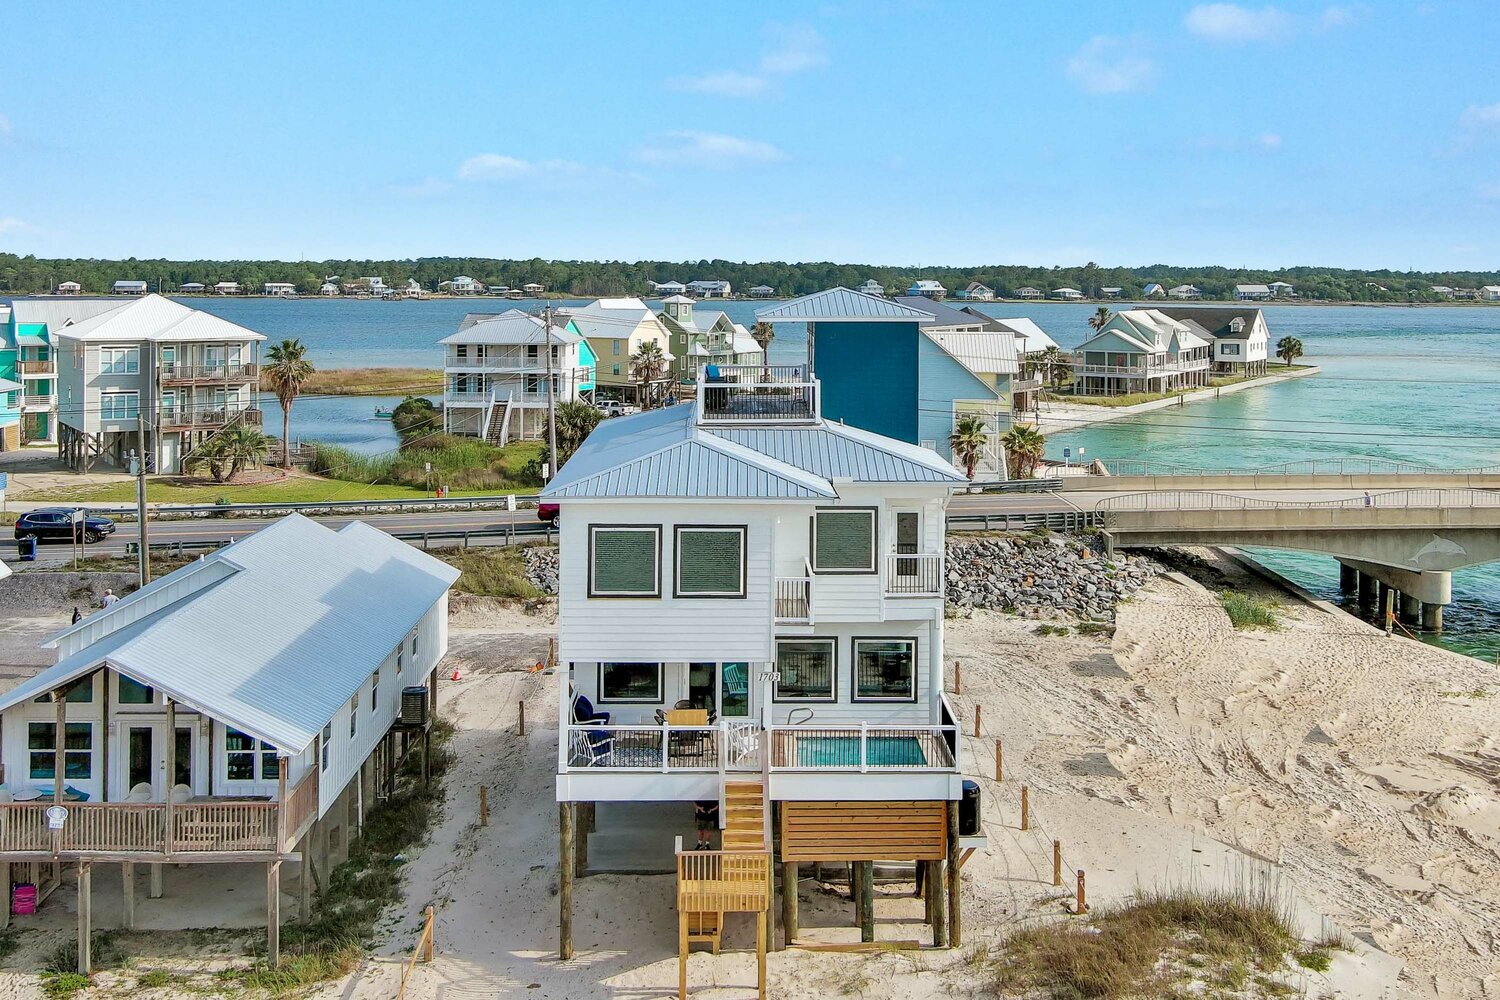 Jetty House property by Beachball Properties sits along the beach, offering a beach front stay for individuals. Owner of Beachball Properties said that 2020 was the best year for the beach rental business as many people were looking to work remote from a relaxing location.